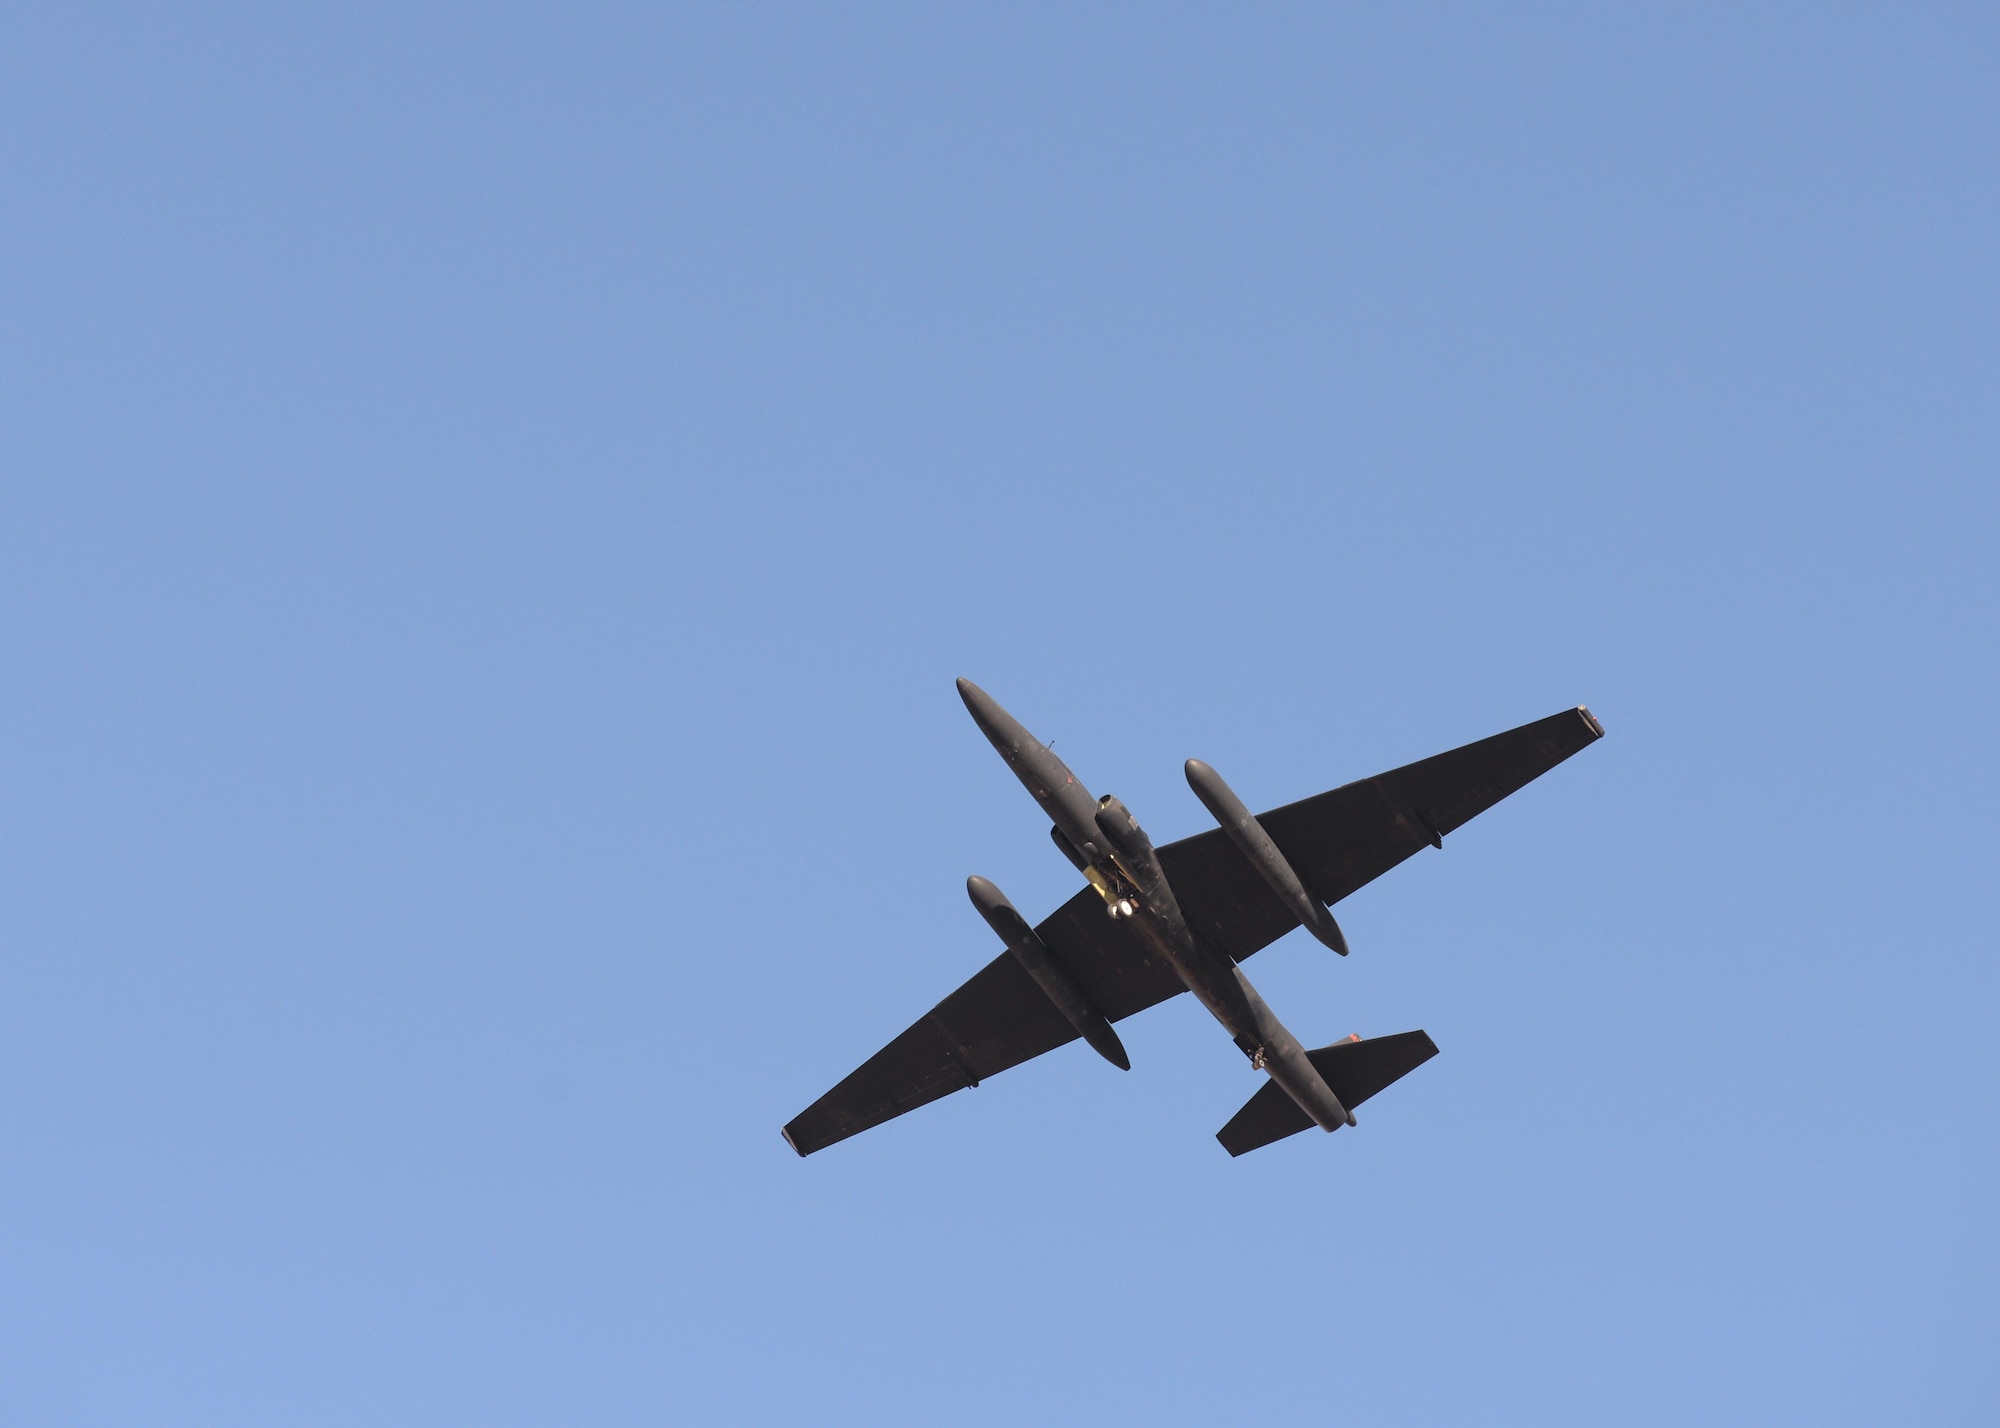 A U-2 Dragon Lady flies over Beale Air Force Base after resuming operations Sept. 23, 2016. Following a U-2 incident this week flying operations for the aircraft at Beale were put on hold while the installation responded to the incident. Global U-2 flying operations were not impacted as a result of the incident and pilots and maintainers continued to support commanders with high-altitude ISR. (U.S. Air Force photo/Airman Tristan D. Viglianco)